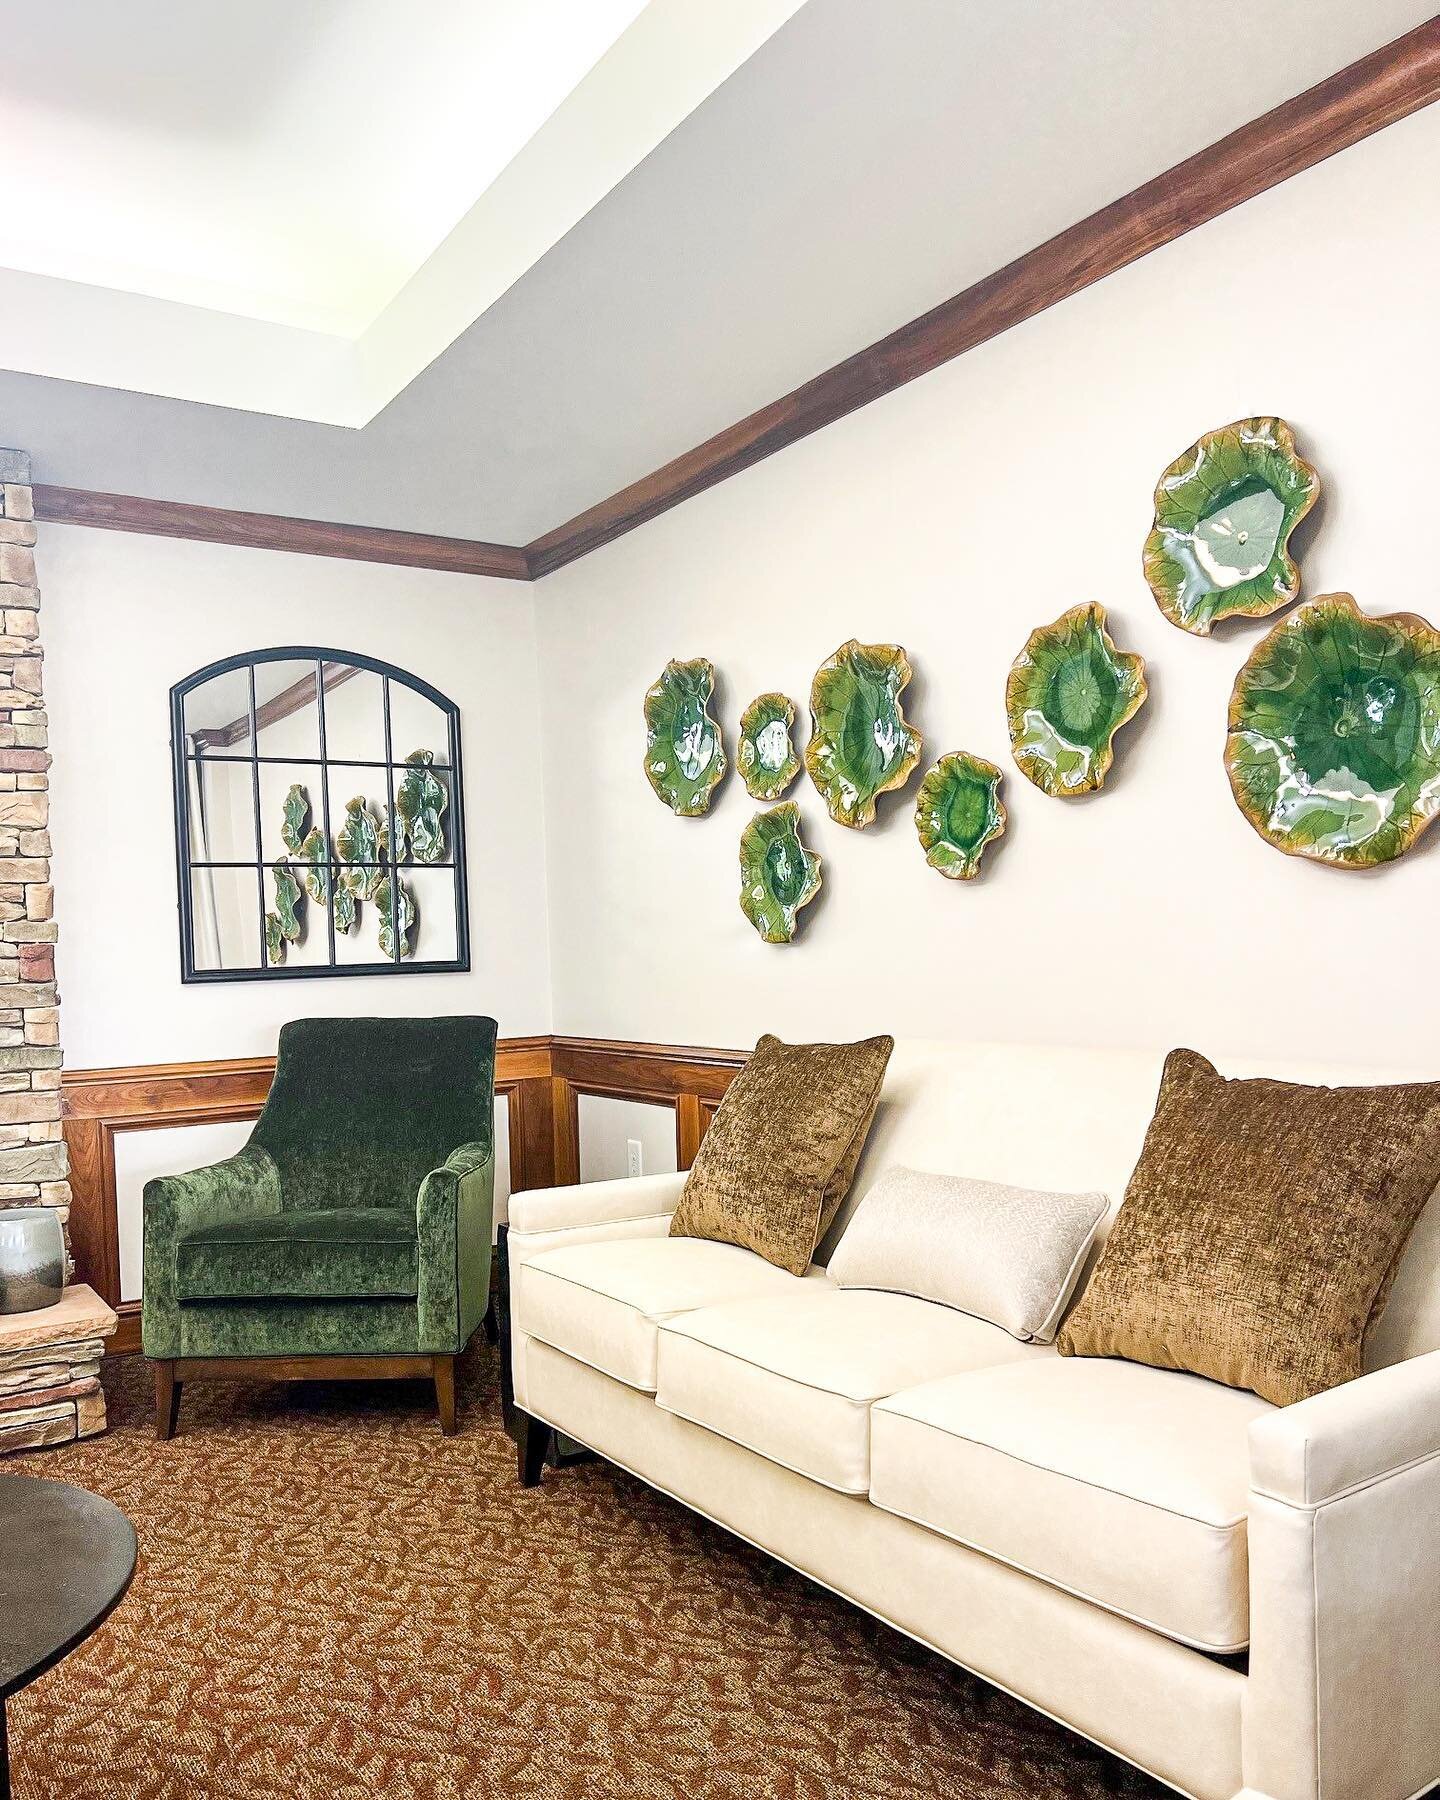 Feeling serene with all this green 💚

The Abundant Christian Living Community - Independent Living Towers in Johnson City just refreshed their lobby and we are loving how inviting the space feels!